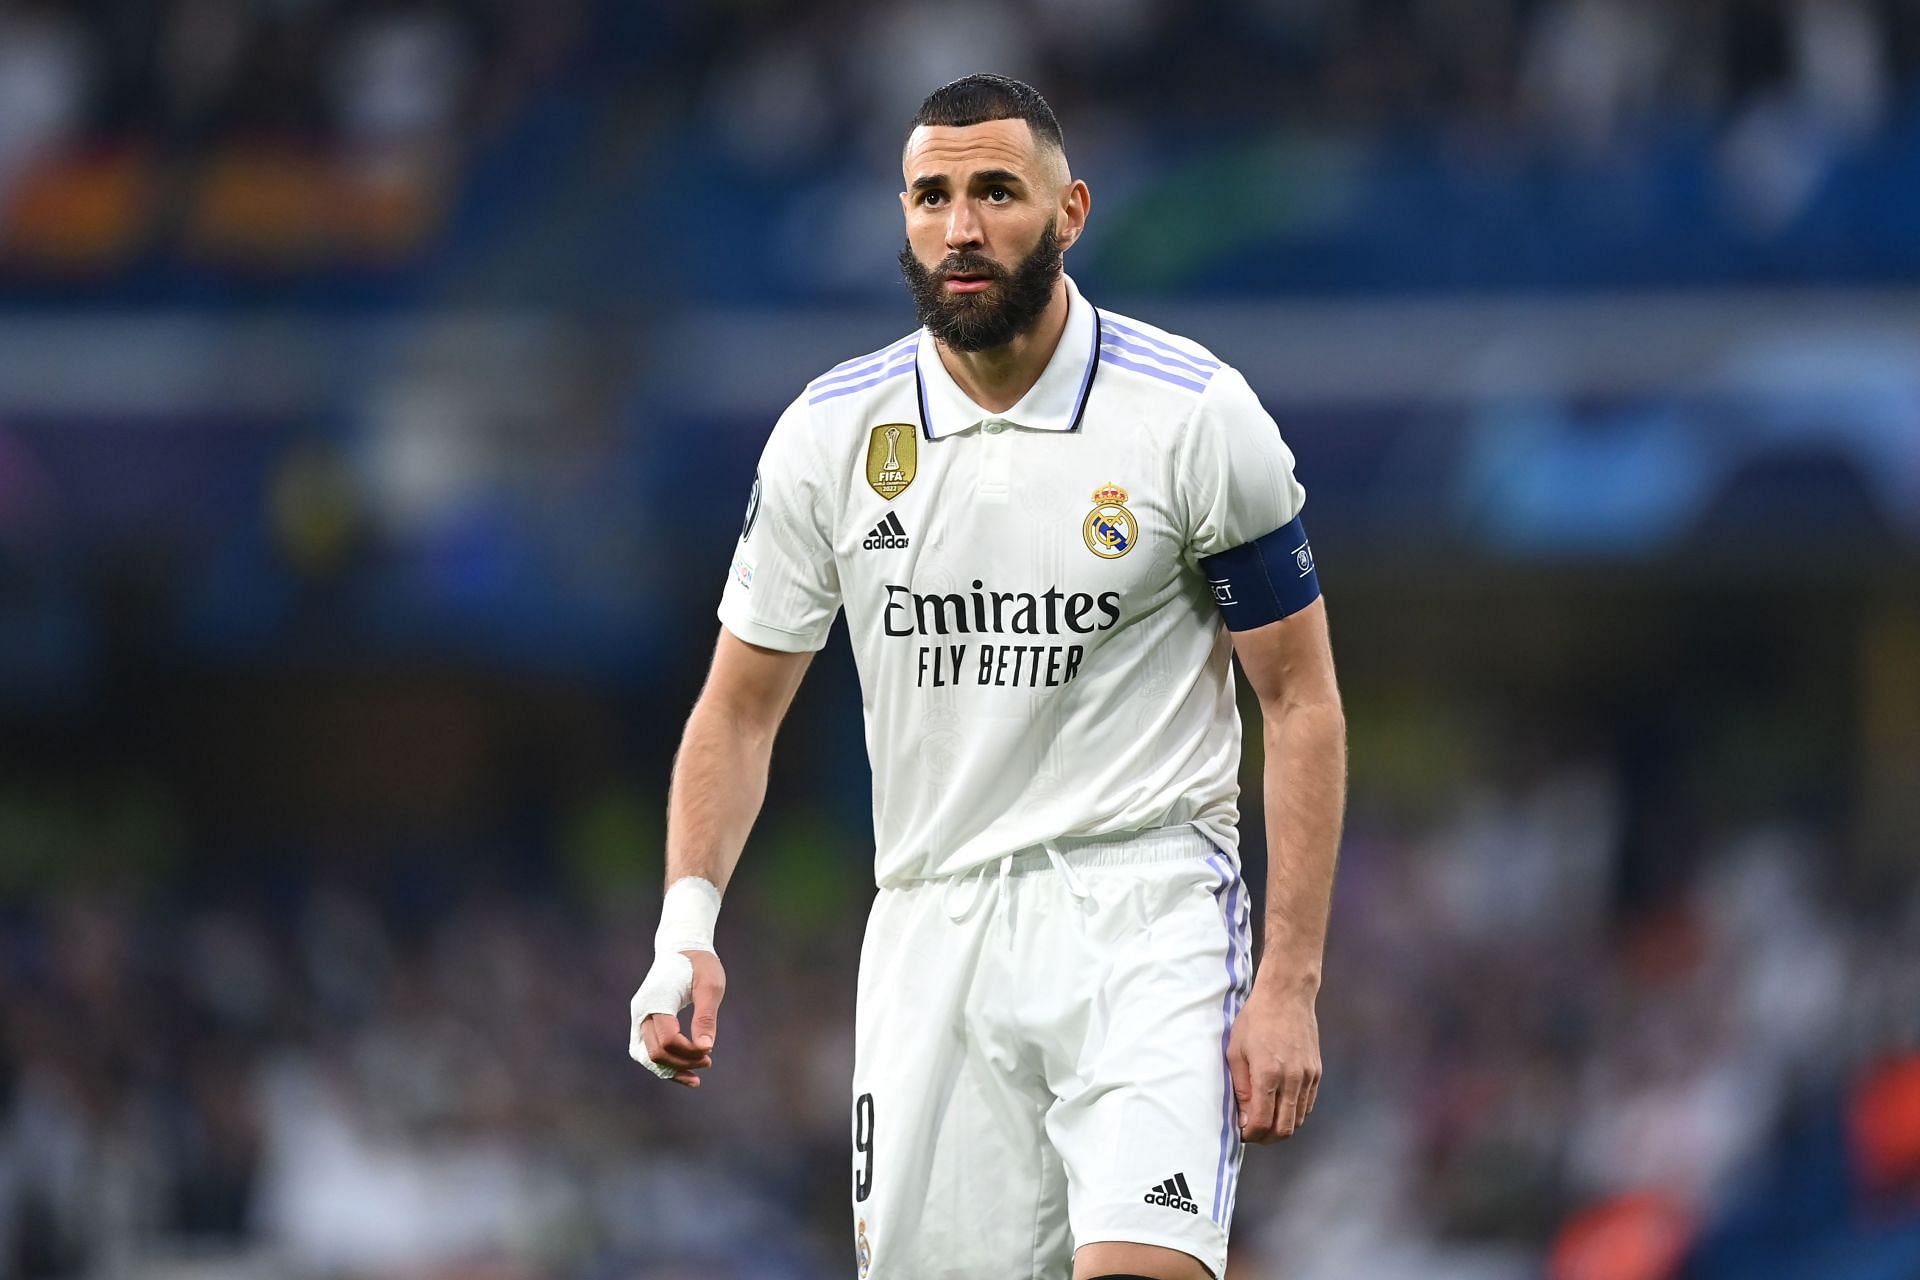 Karim Benzema is expected to slow down soon.